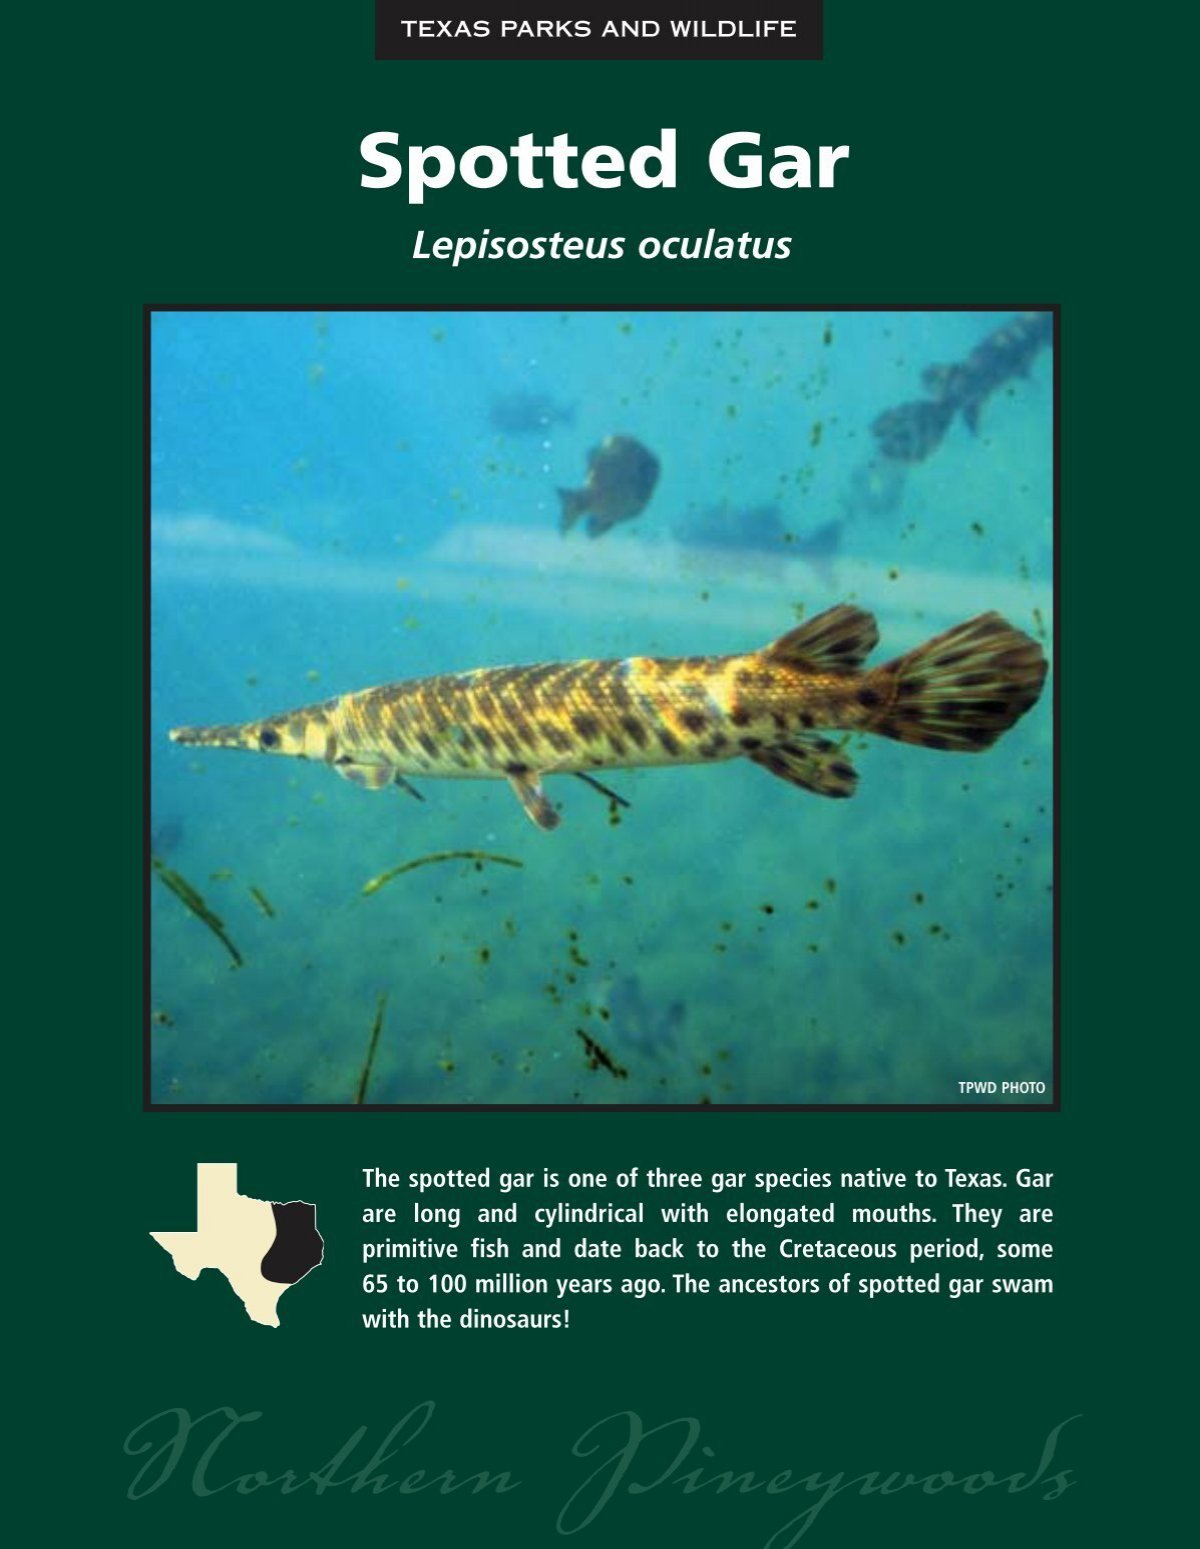 Spotted Gar - The State of Water